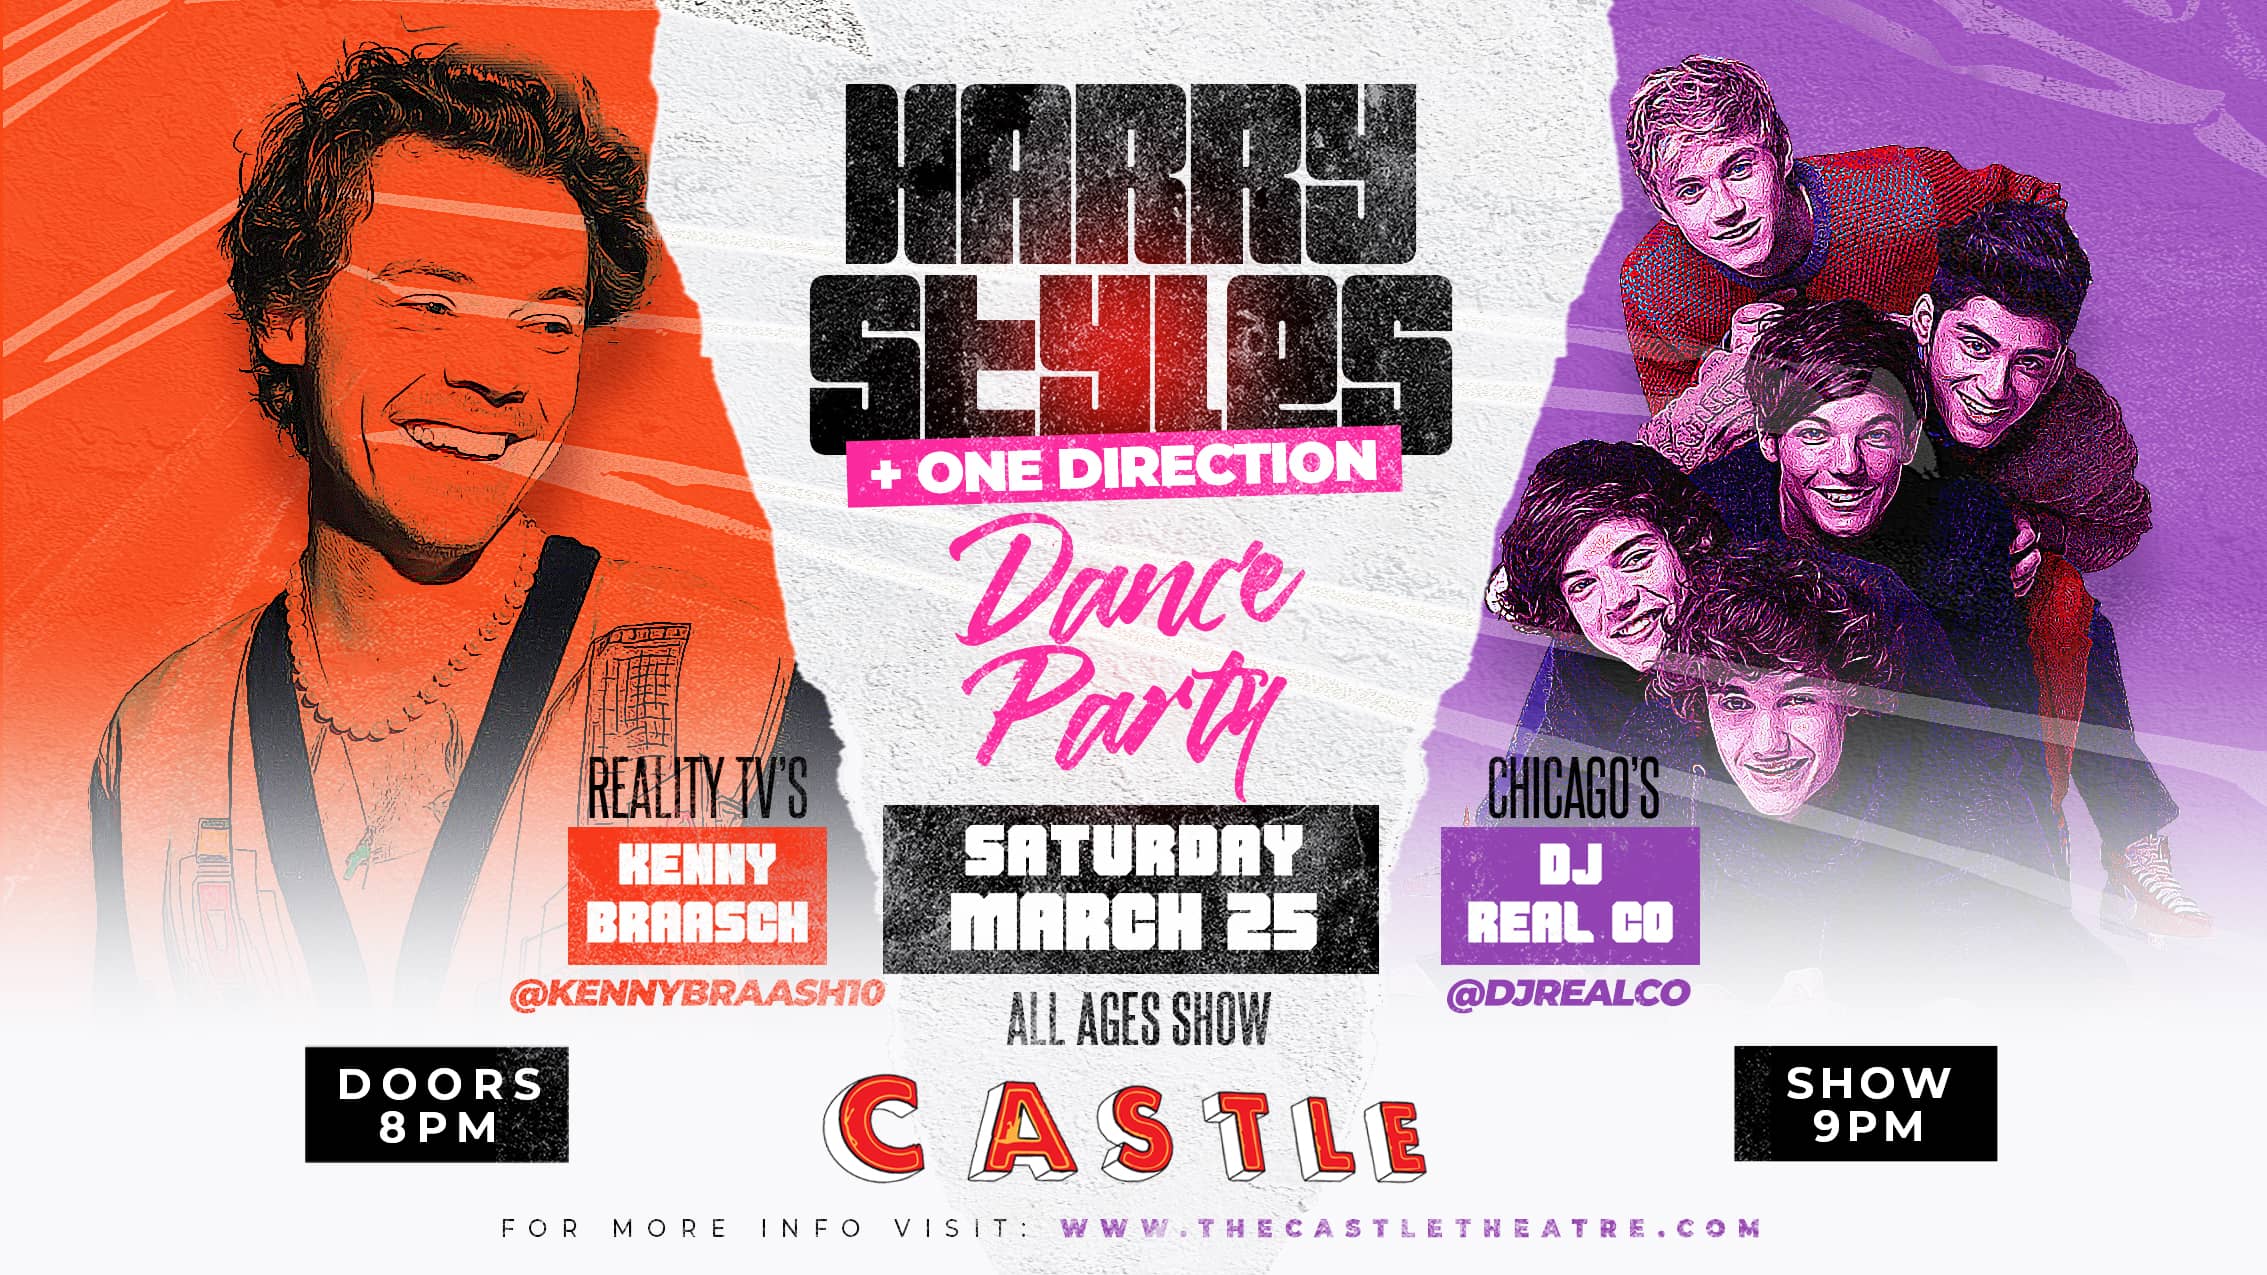 Poster for the Harry Styles Dance Party on Saturday March 25th at The Castle Theatre in Bloomington, IL.